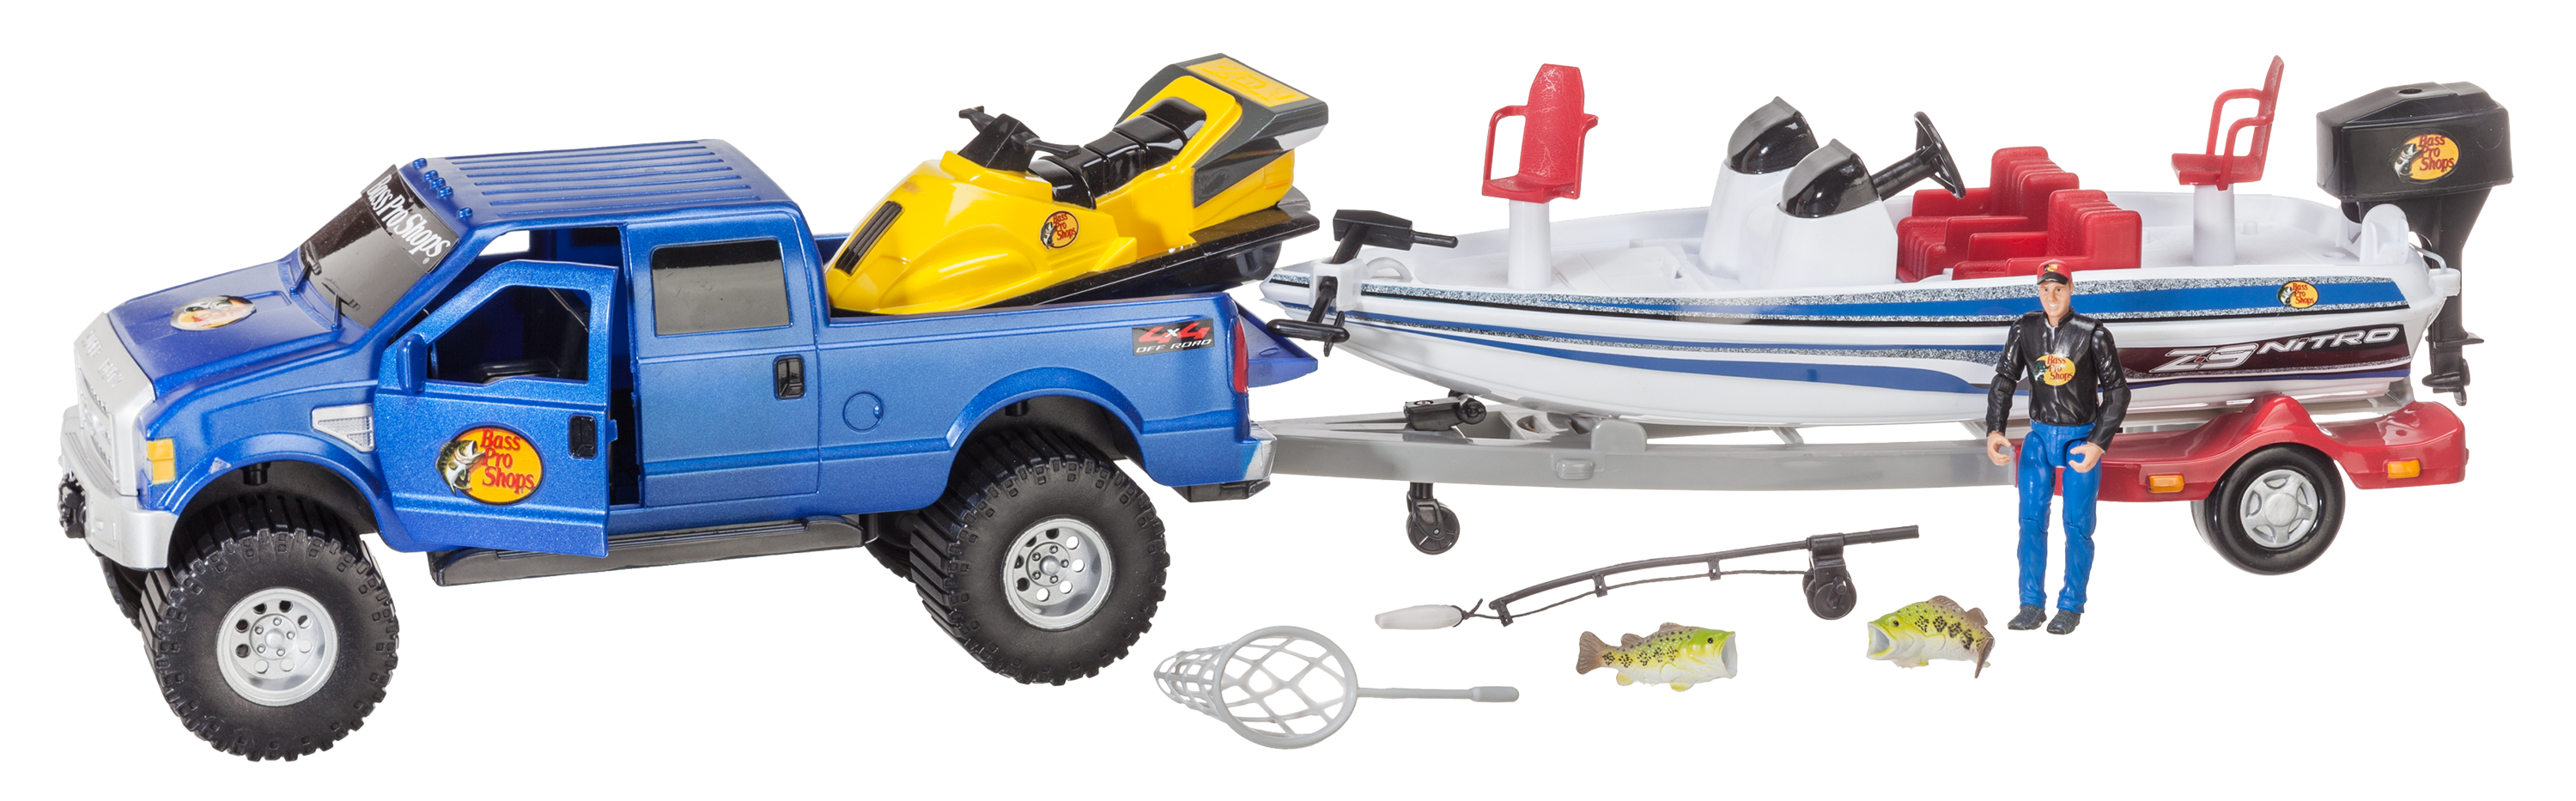 Bass Pro Shops Deluxe Ford F-250 and NITRO Bass Fishing Adventure Truck and  Boat Play Set for Kids